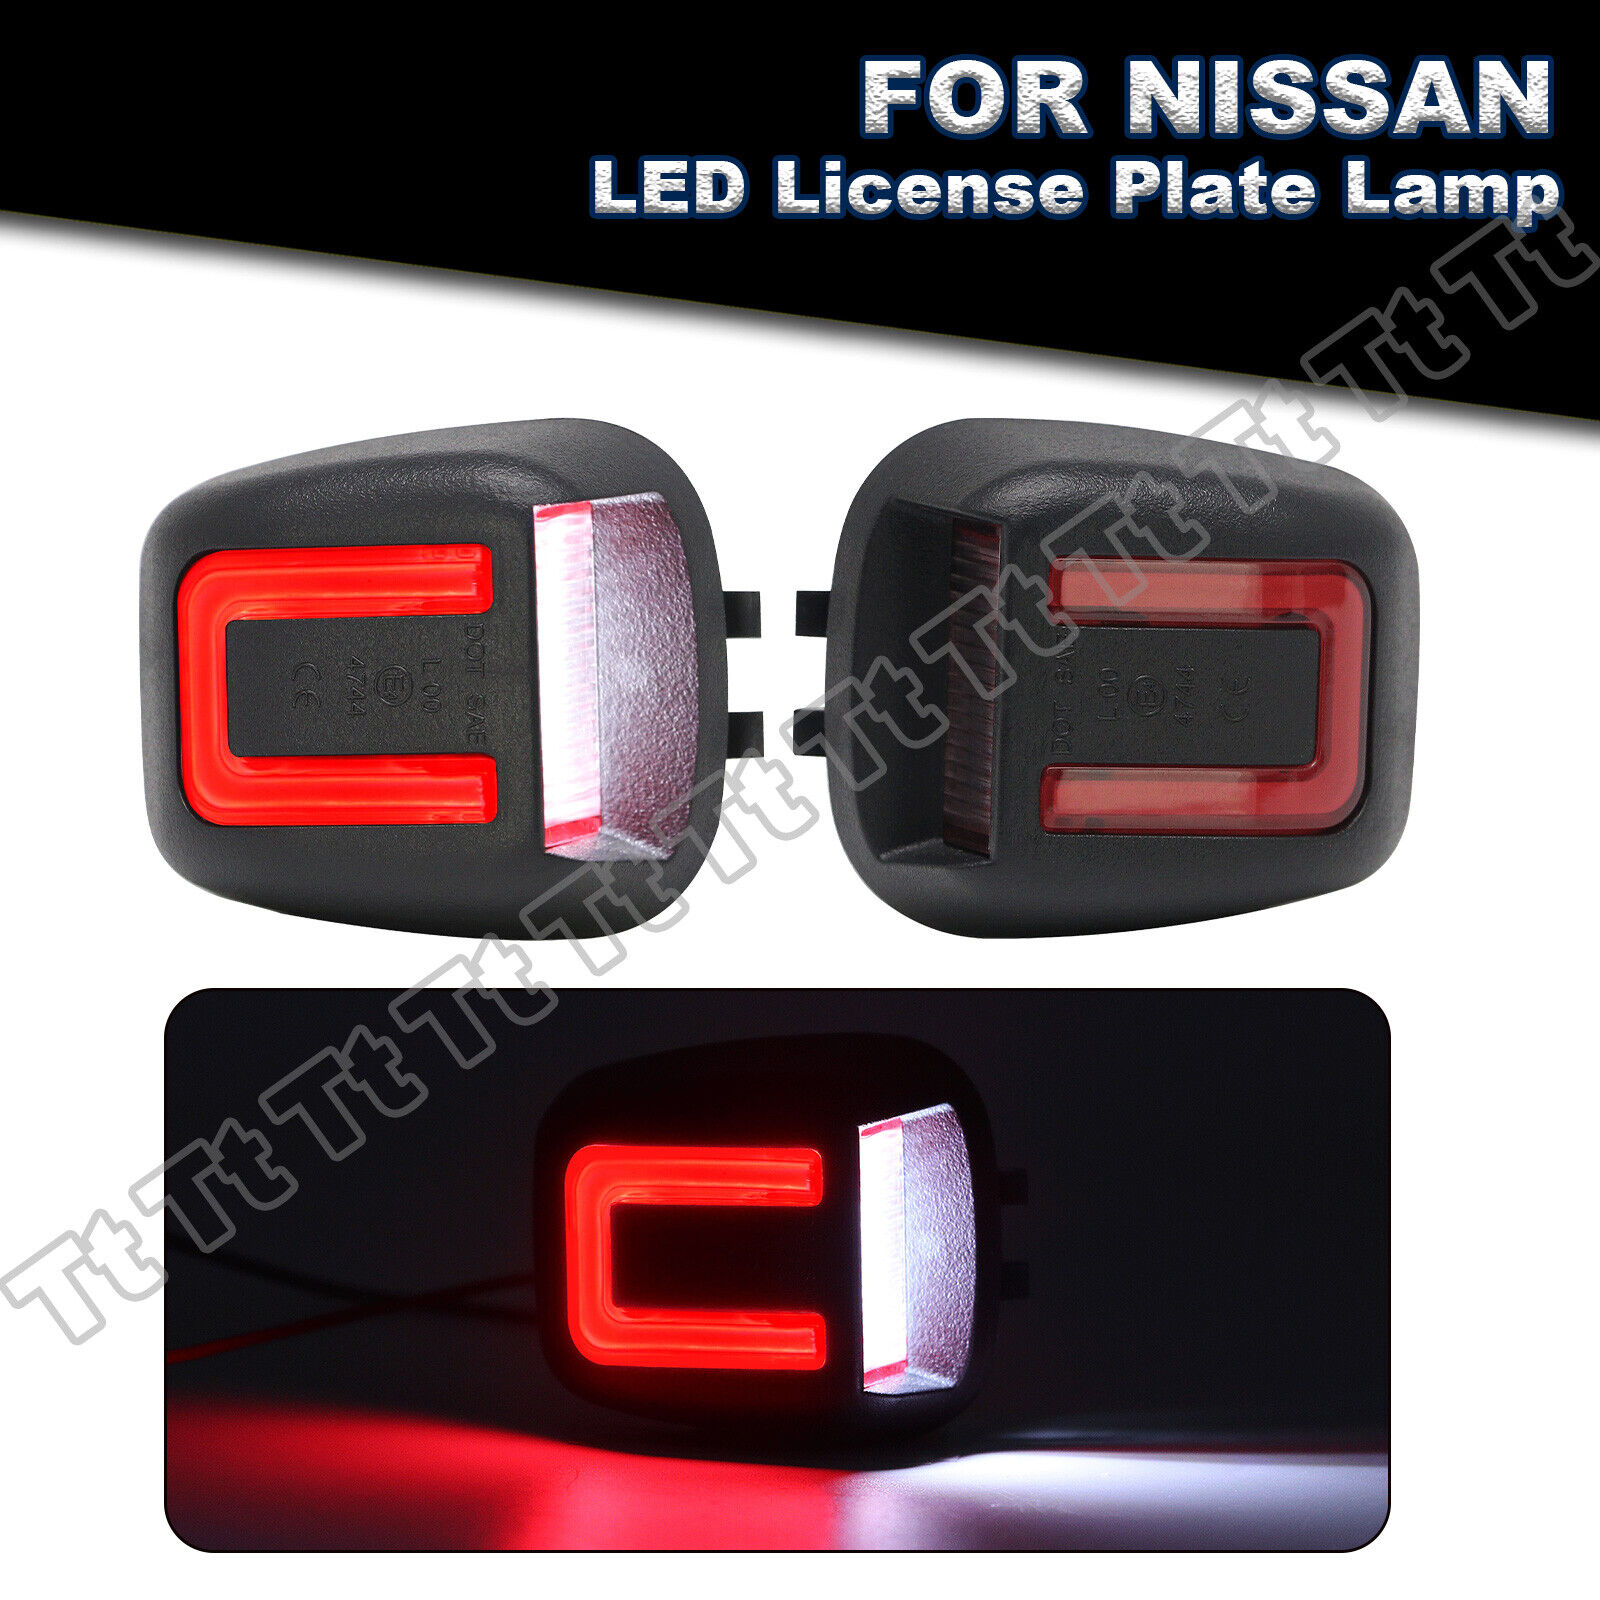 White & Red LED License Plate Light Lamp For Nissan Frontier Armada Xterra Titan